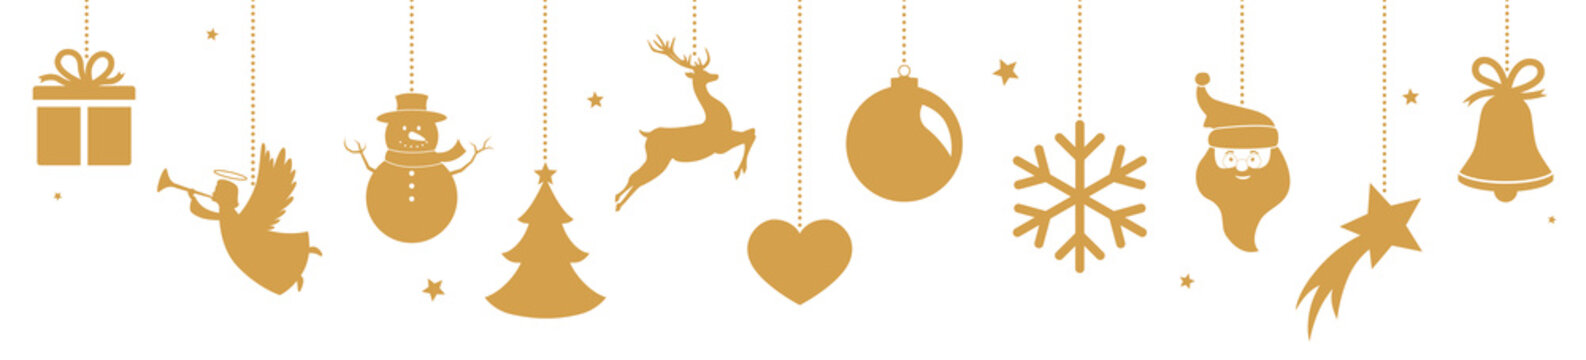 Christmas banner with hanging golden decorations